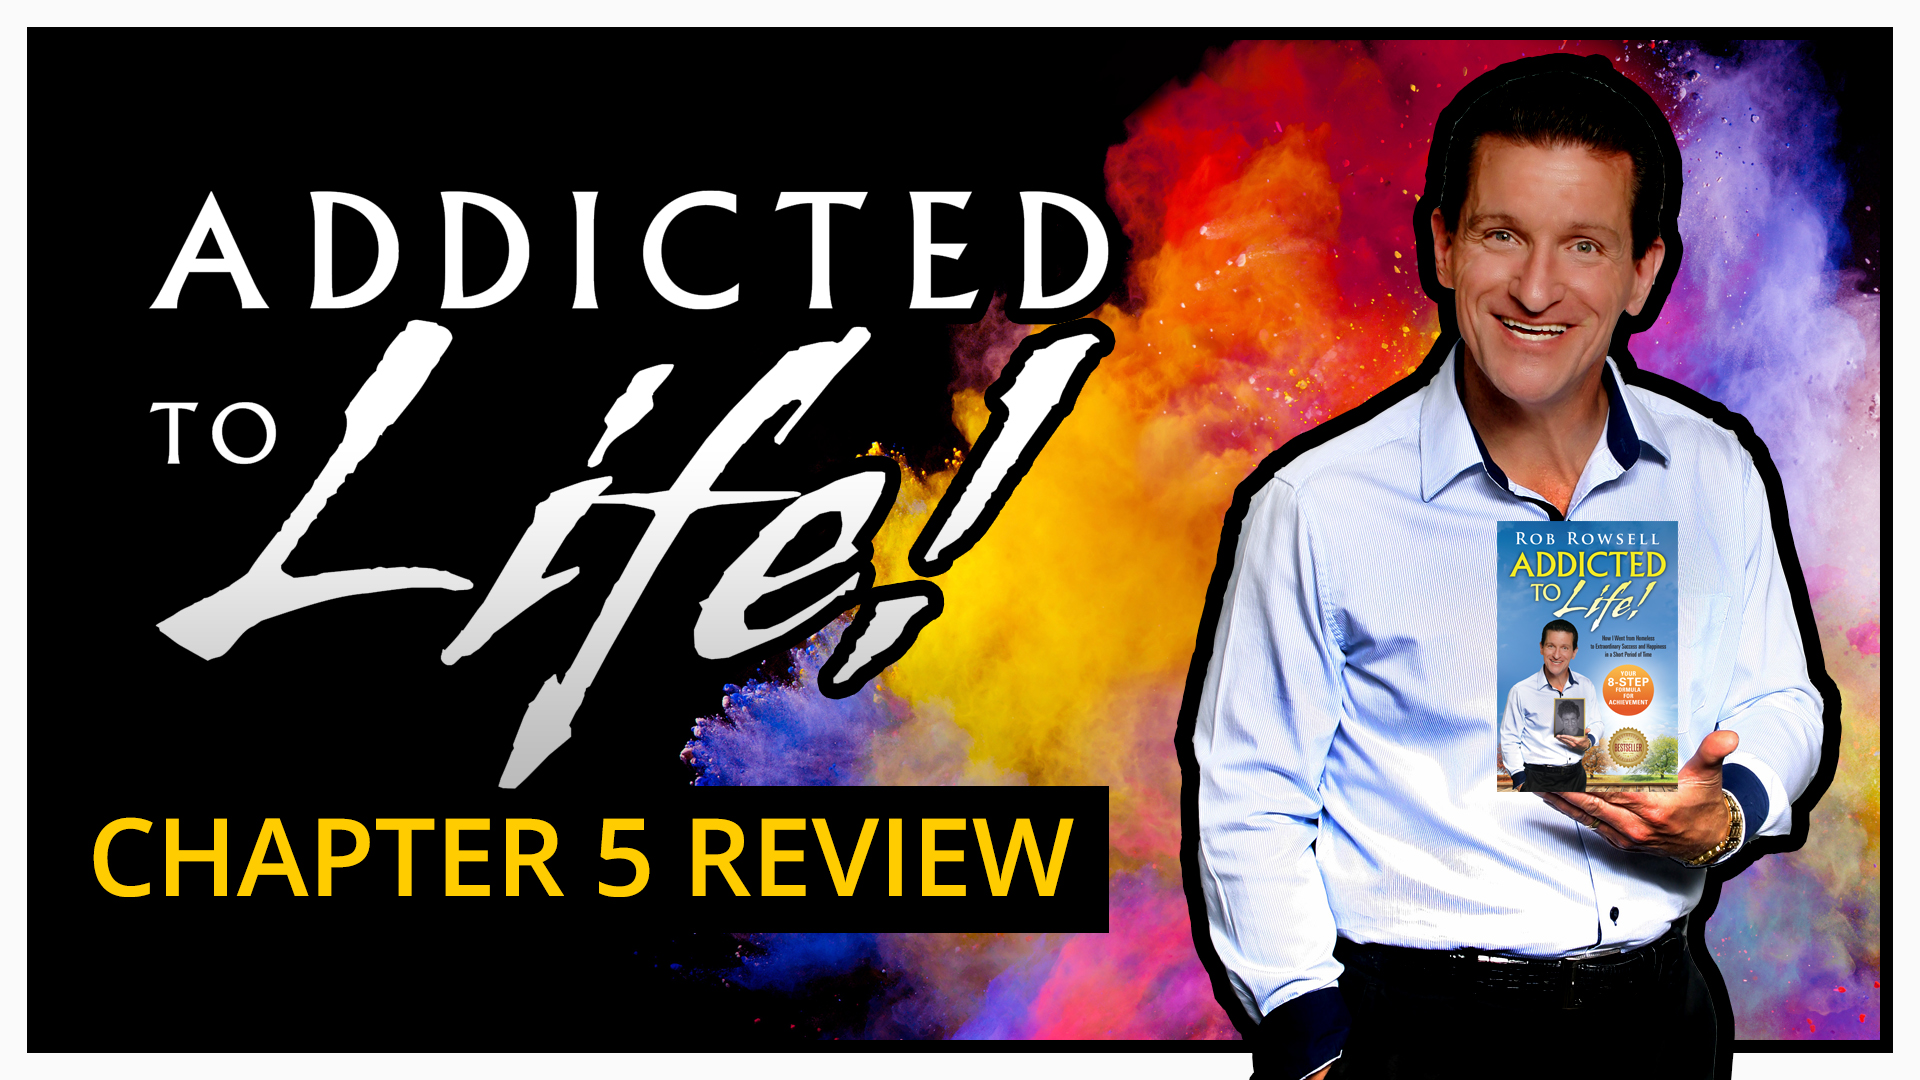 "Addicted to Life" Chapter 5 Review - You Must Be Open to the Unexpected!